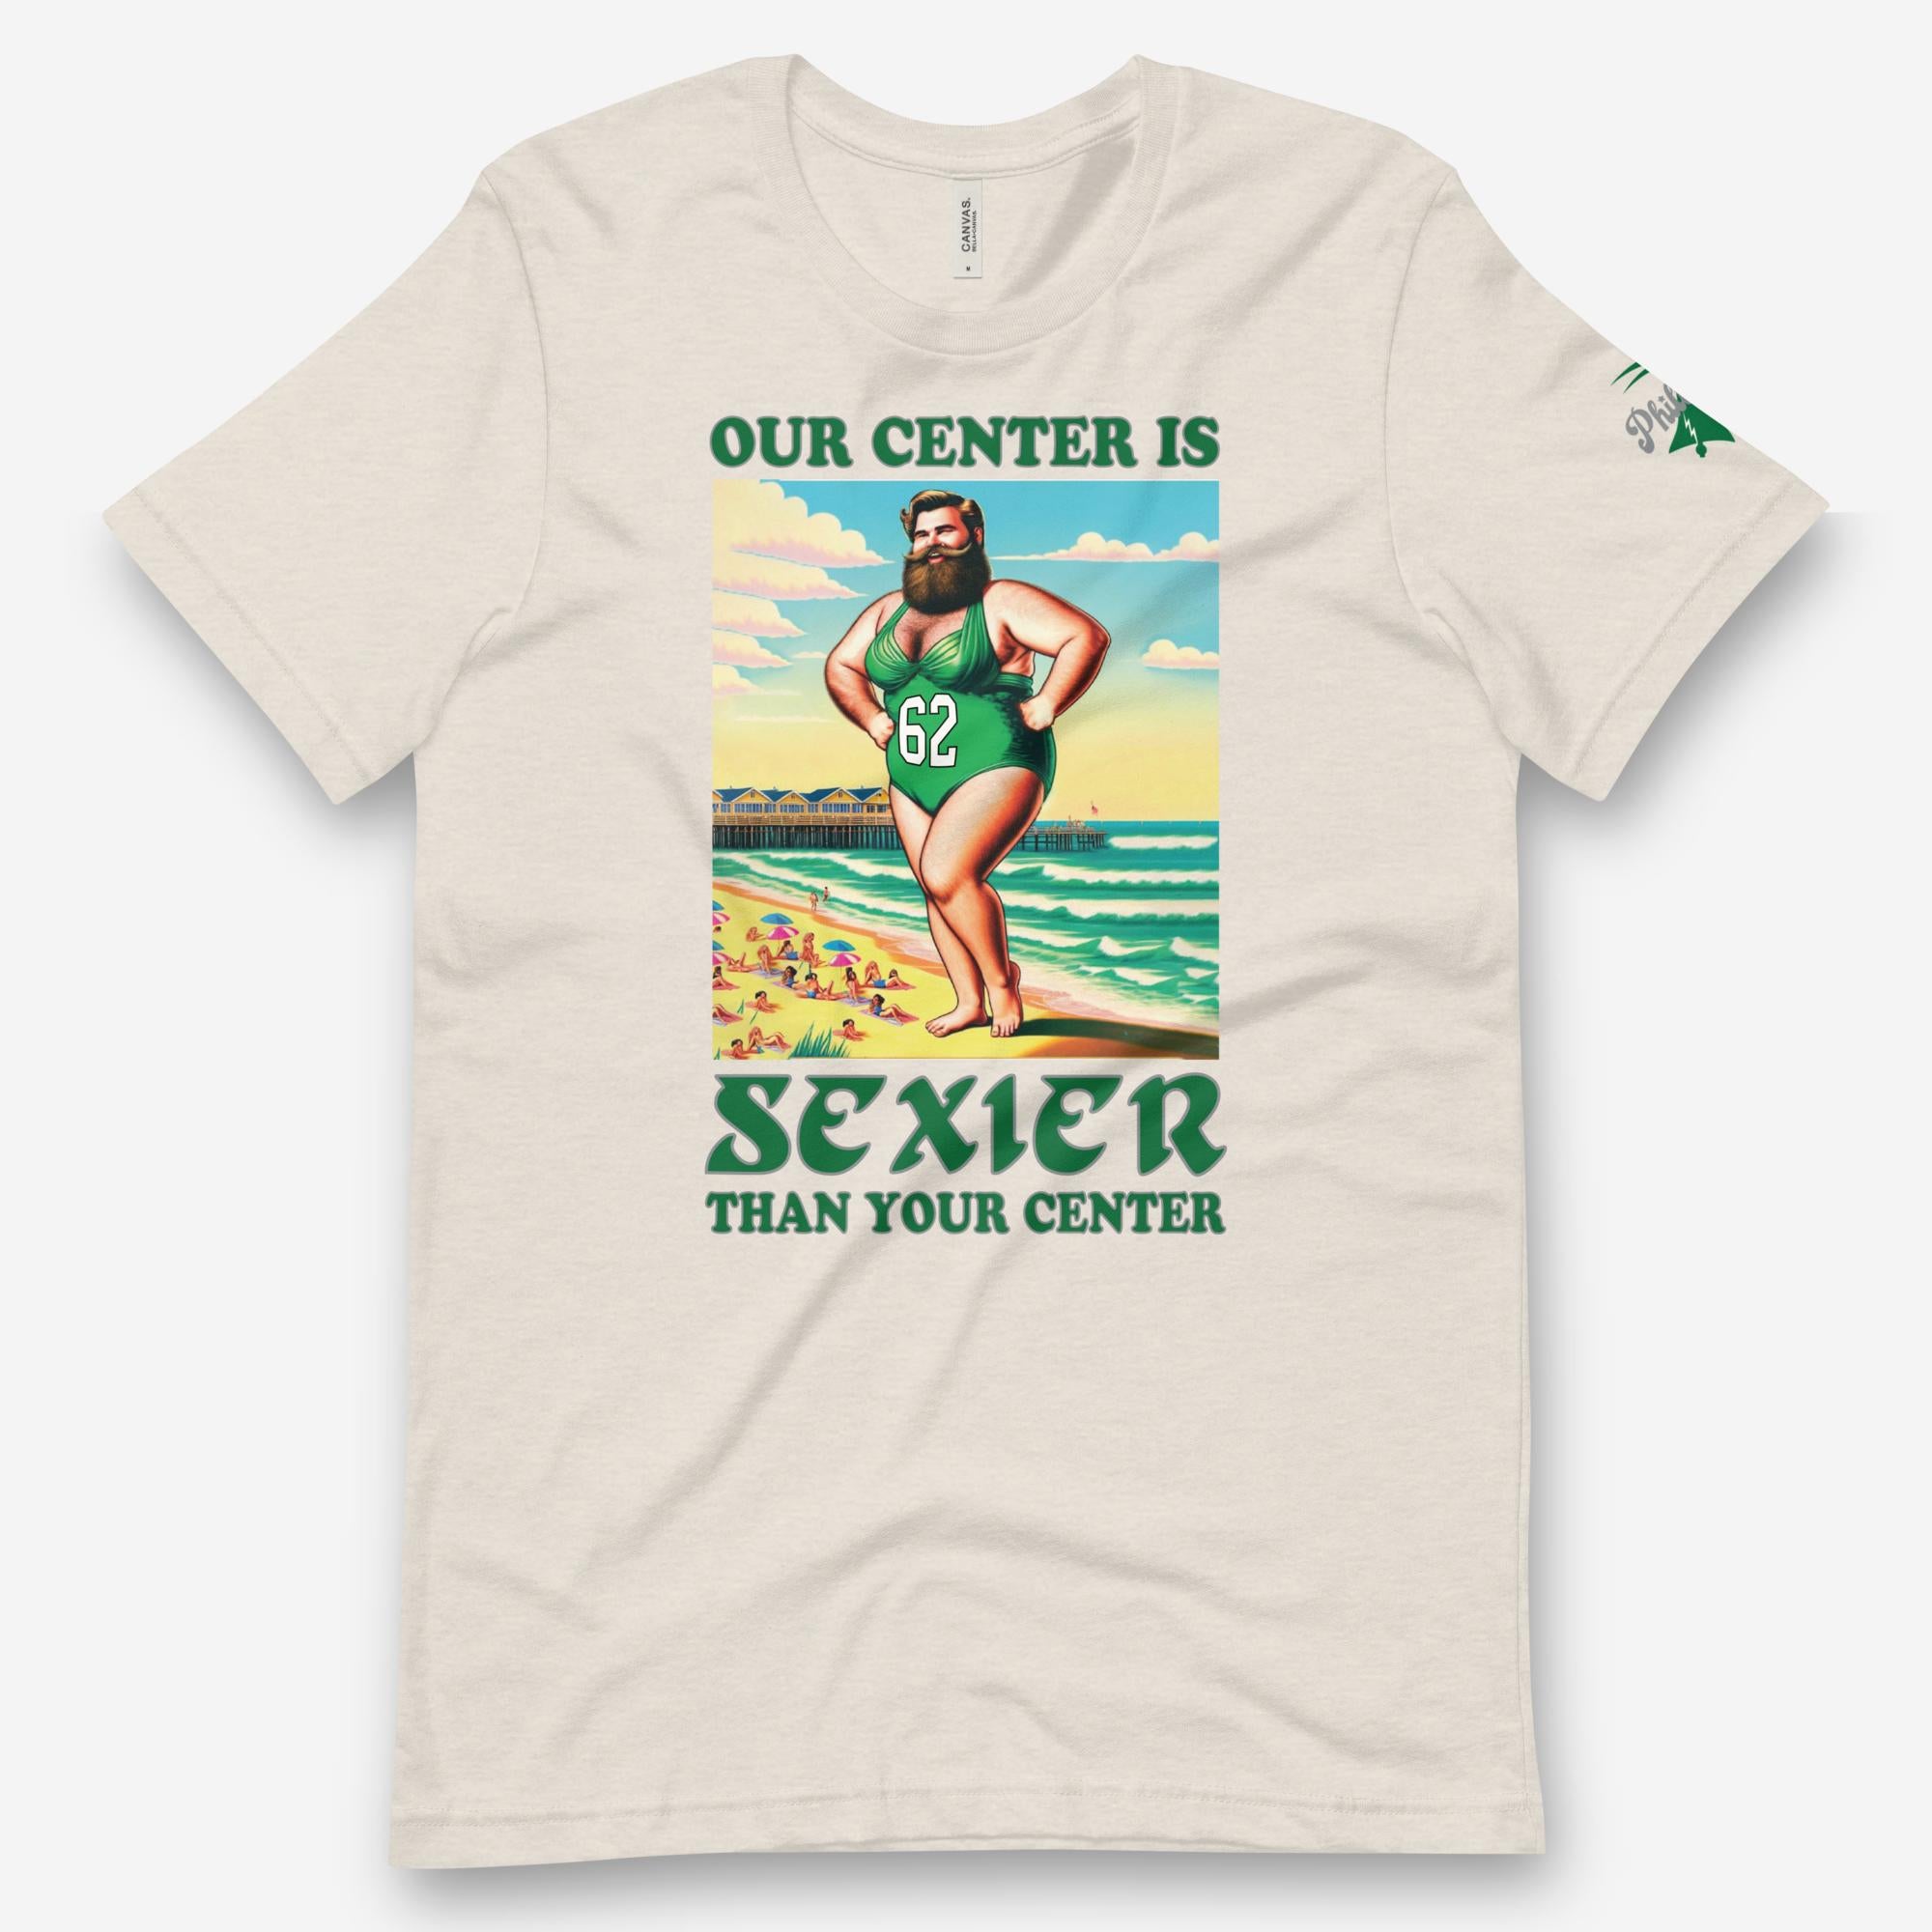 "Our Center Is Sexier Than Your Center" Tee